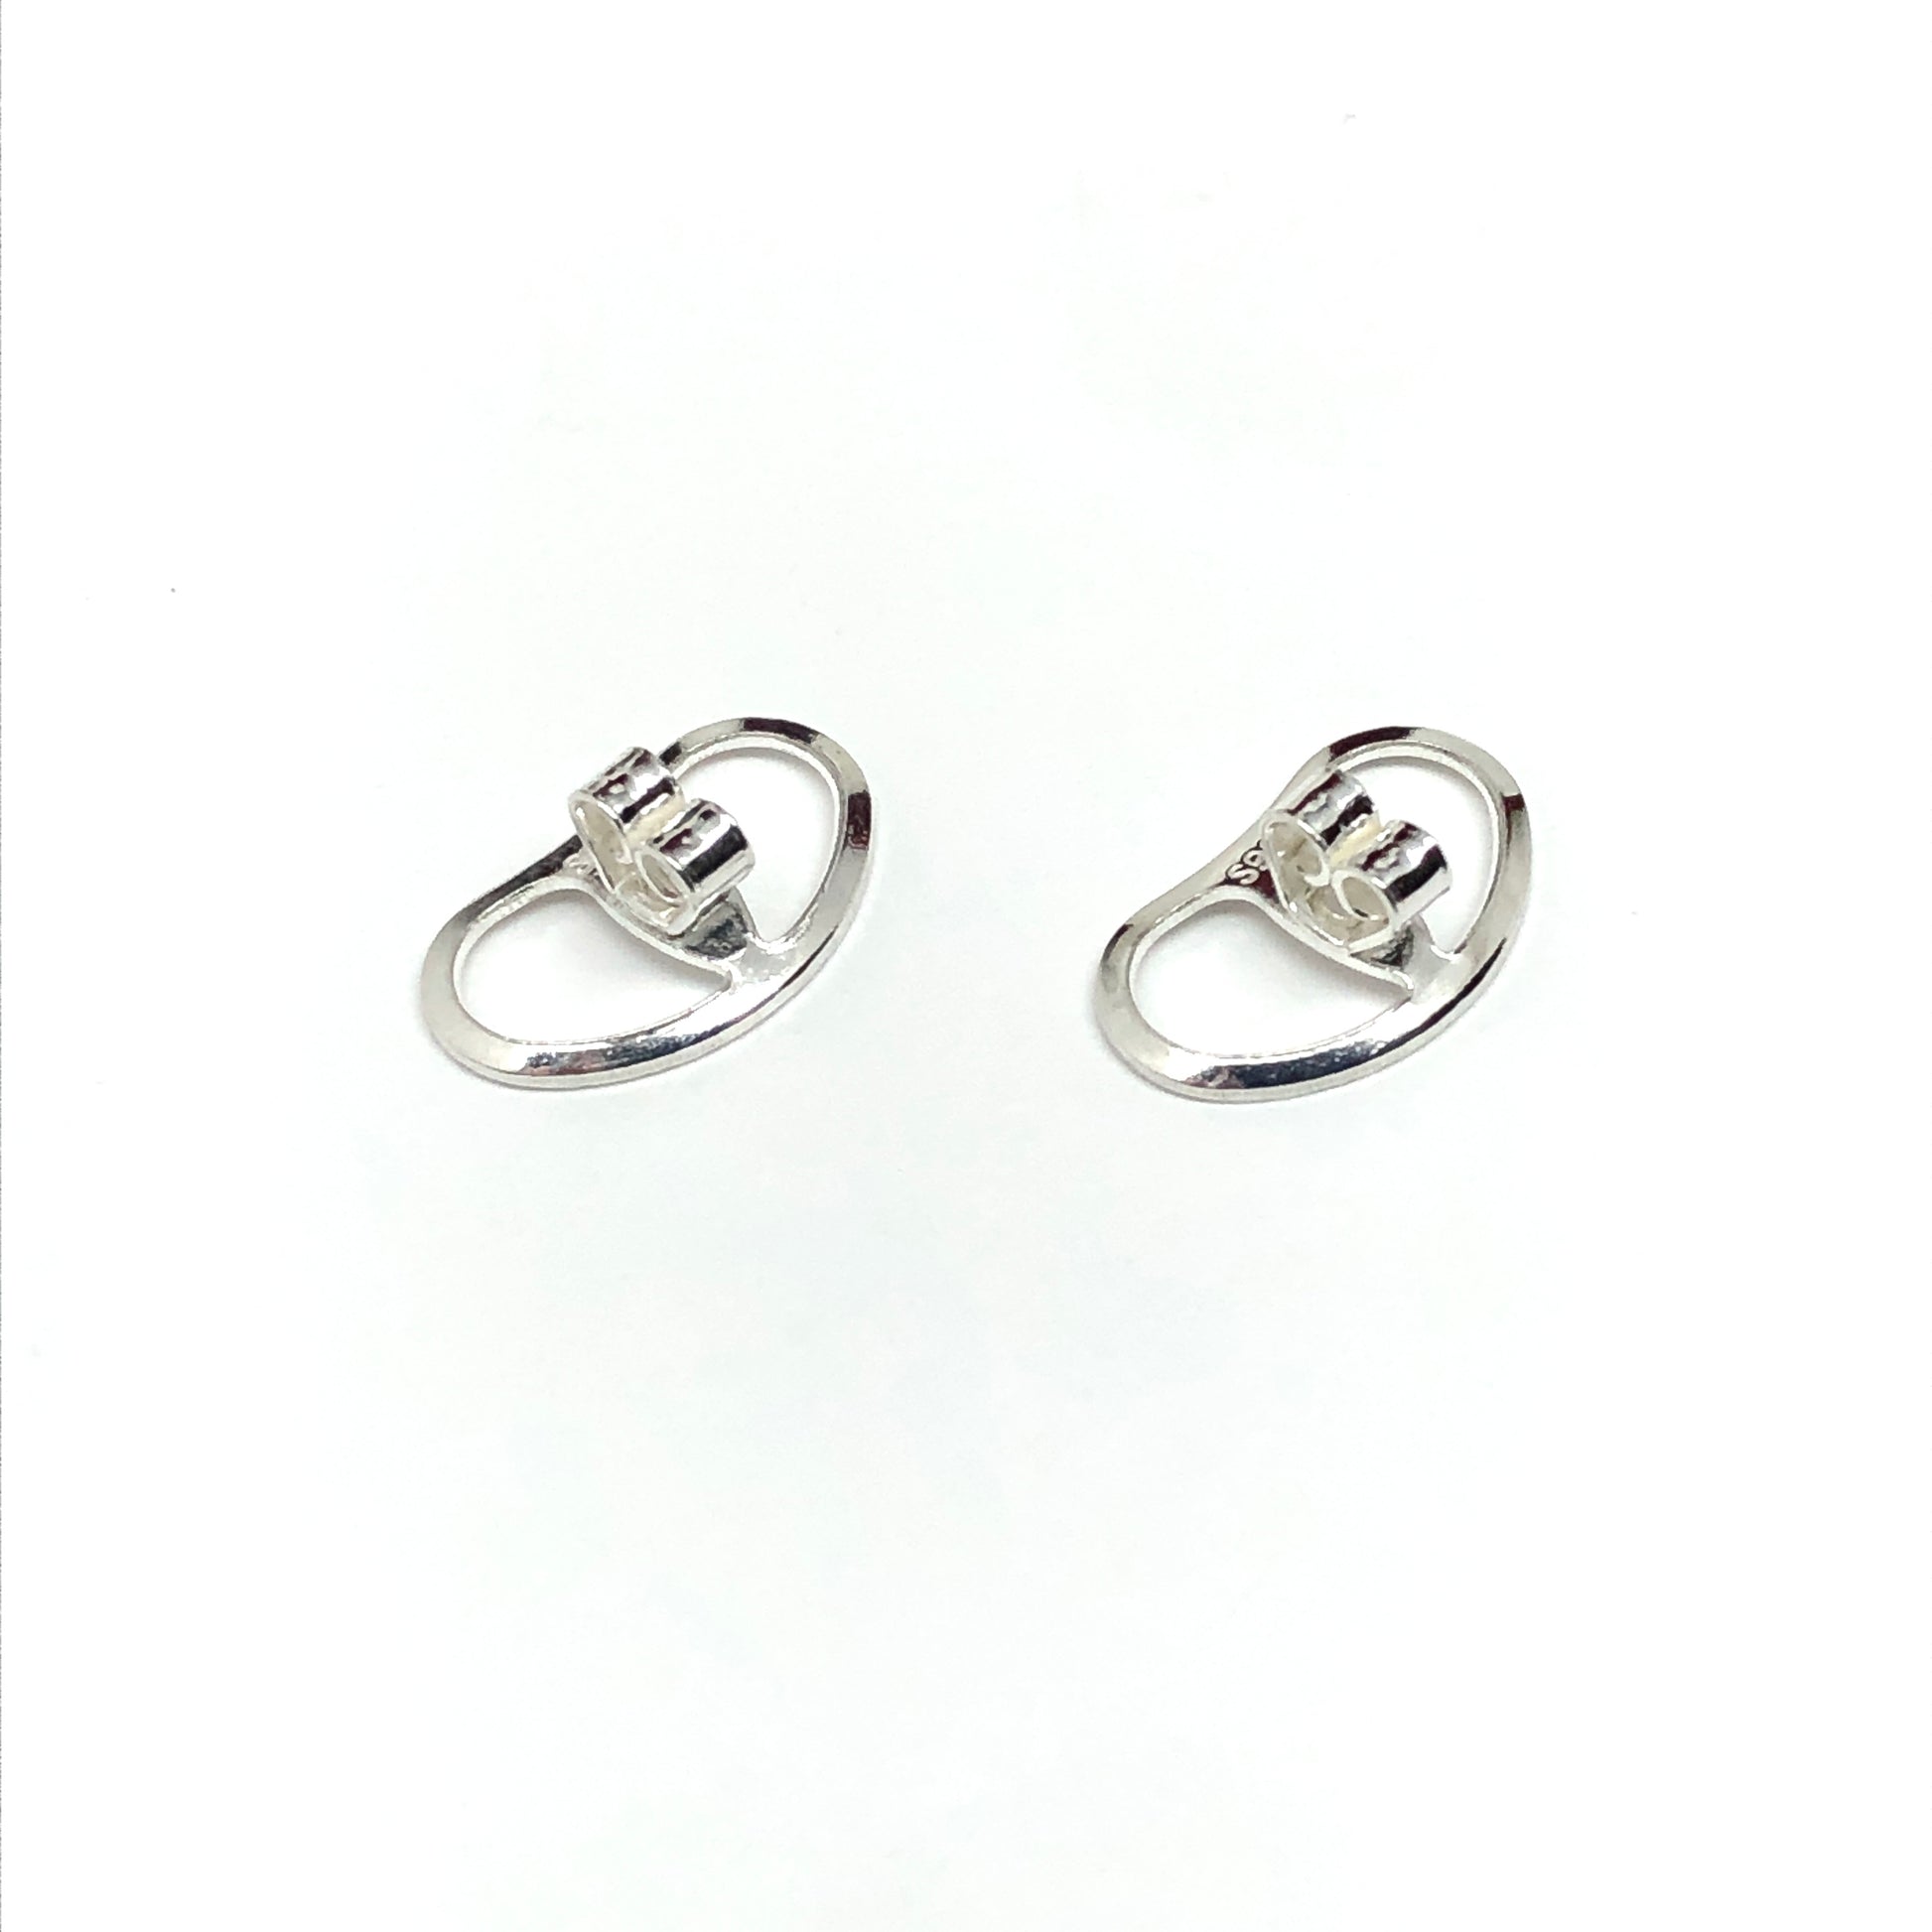 Support Backings | 925 Silver Earring Backs | Pair 13x8mm Large Friction Backs | Kidney Style Wide Earring Backings | No Droop Earnuts 925 Silver